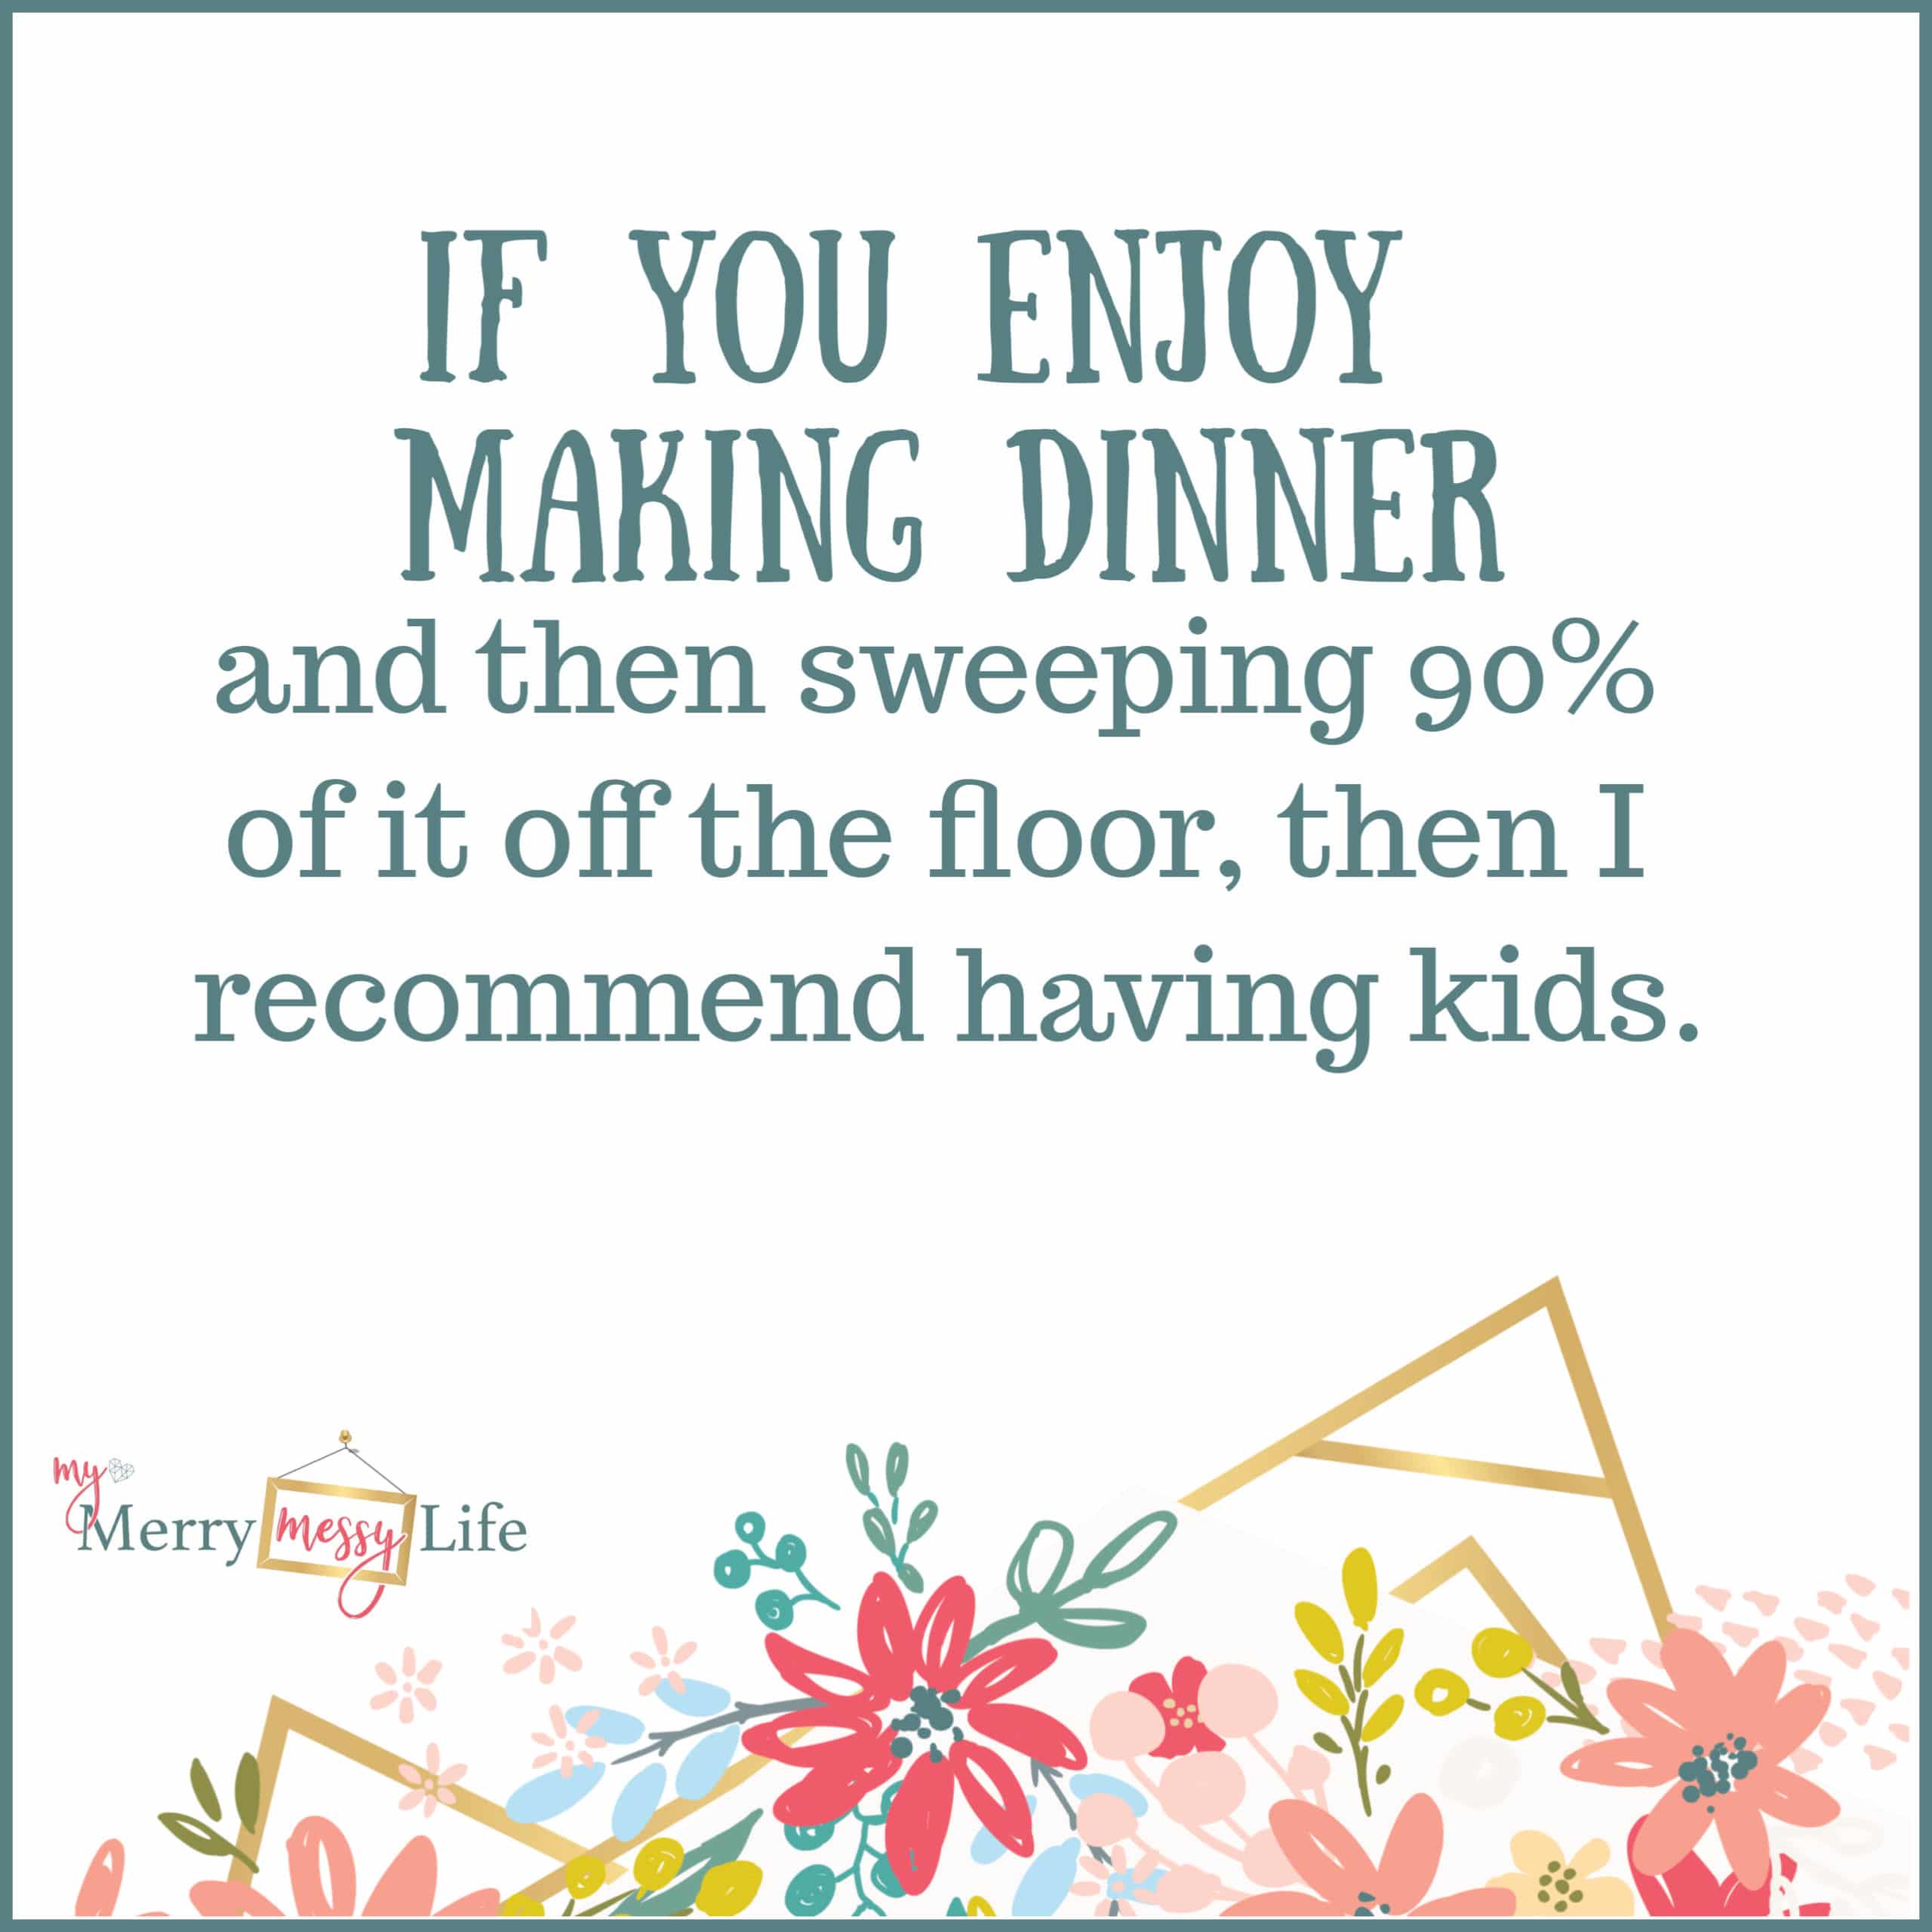 Funny Mom Memes - If you enjoy making dinner and then sweeping 90% of it off of the floor, then I recommend parenthood.